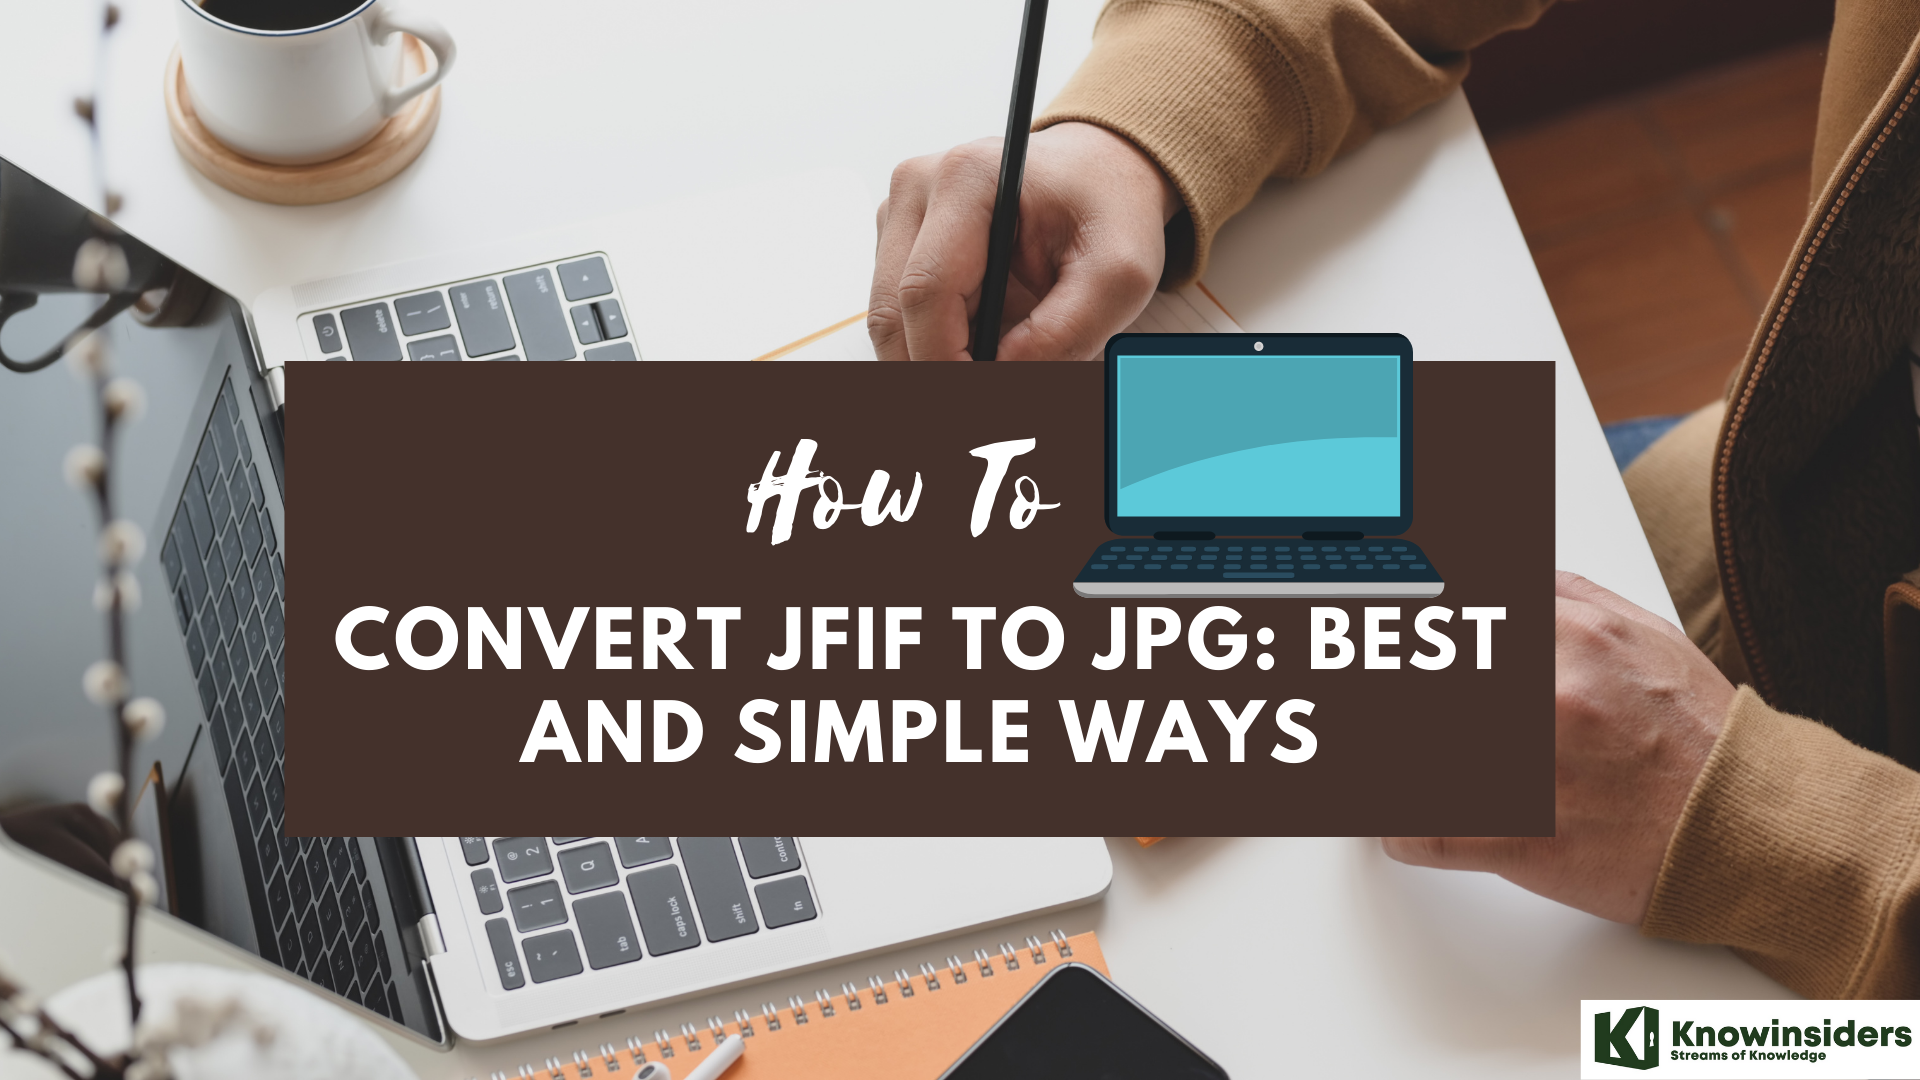 How to onvert JFIF to JPG: Best and simple ways 